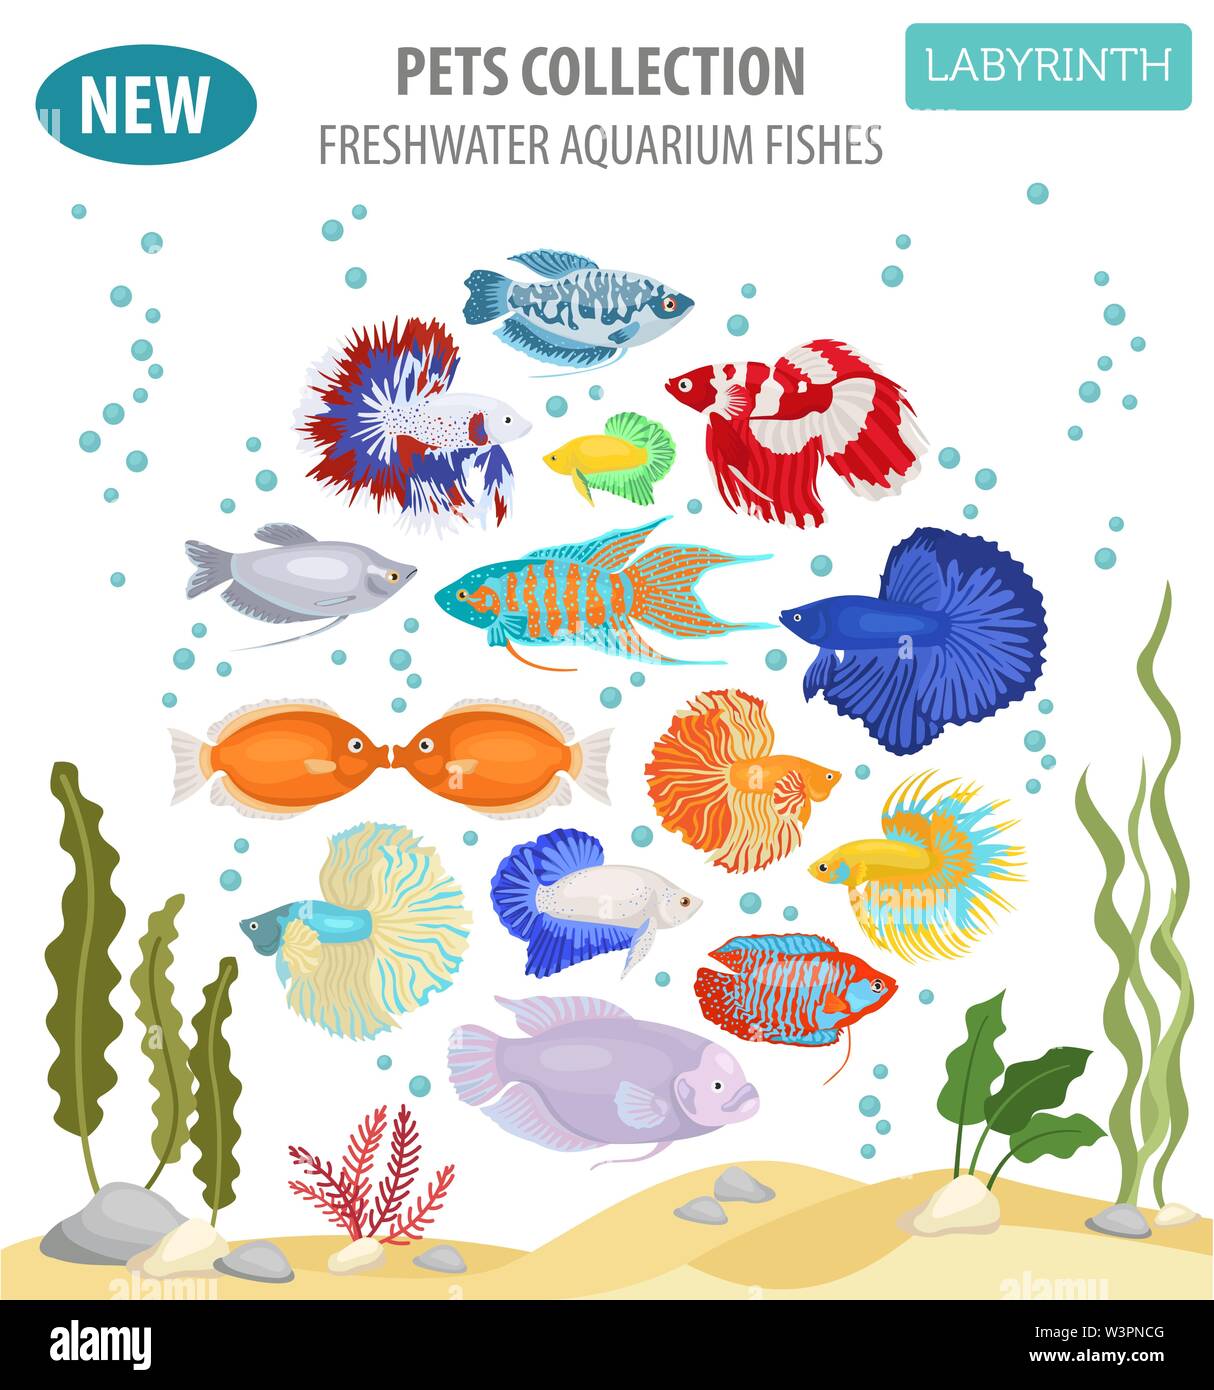 Freshwater aquarium fishes breeds icon set flat style isolated on white. Labyrinth fishes: betta, gourami. Create own infographic about pets. Vector i Stock Vector